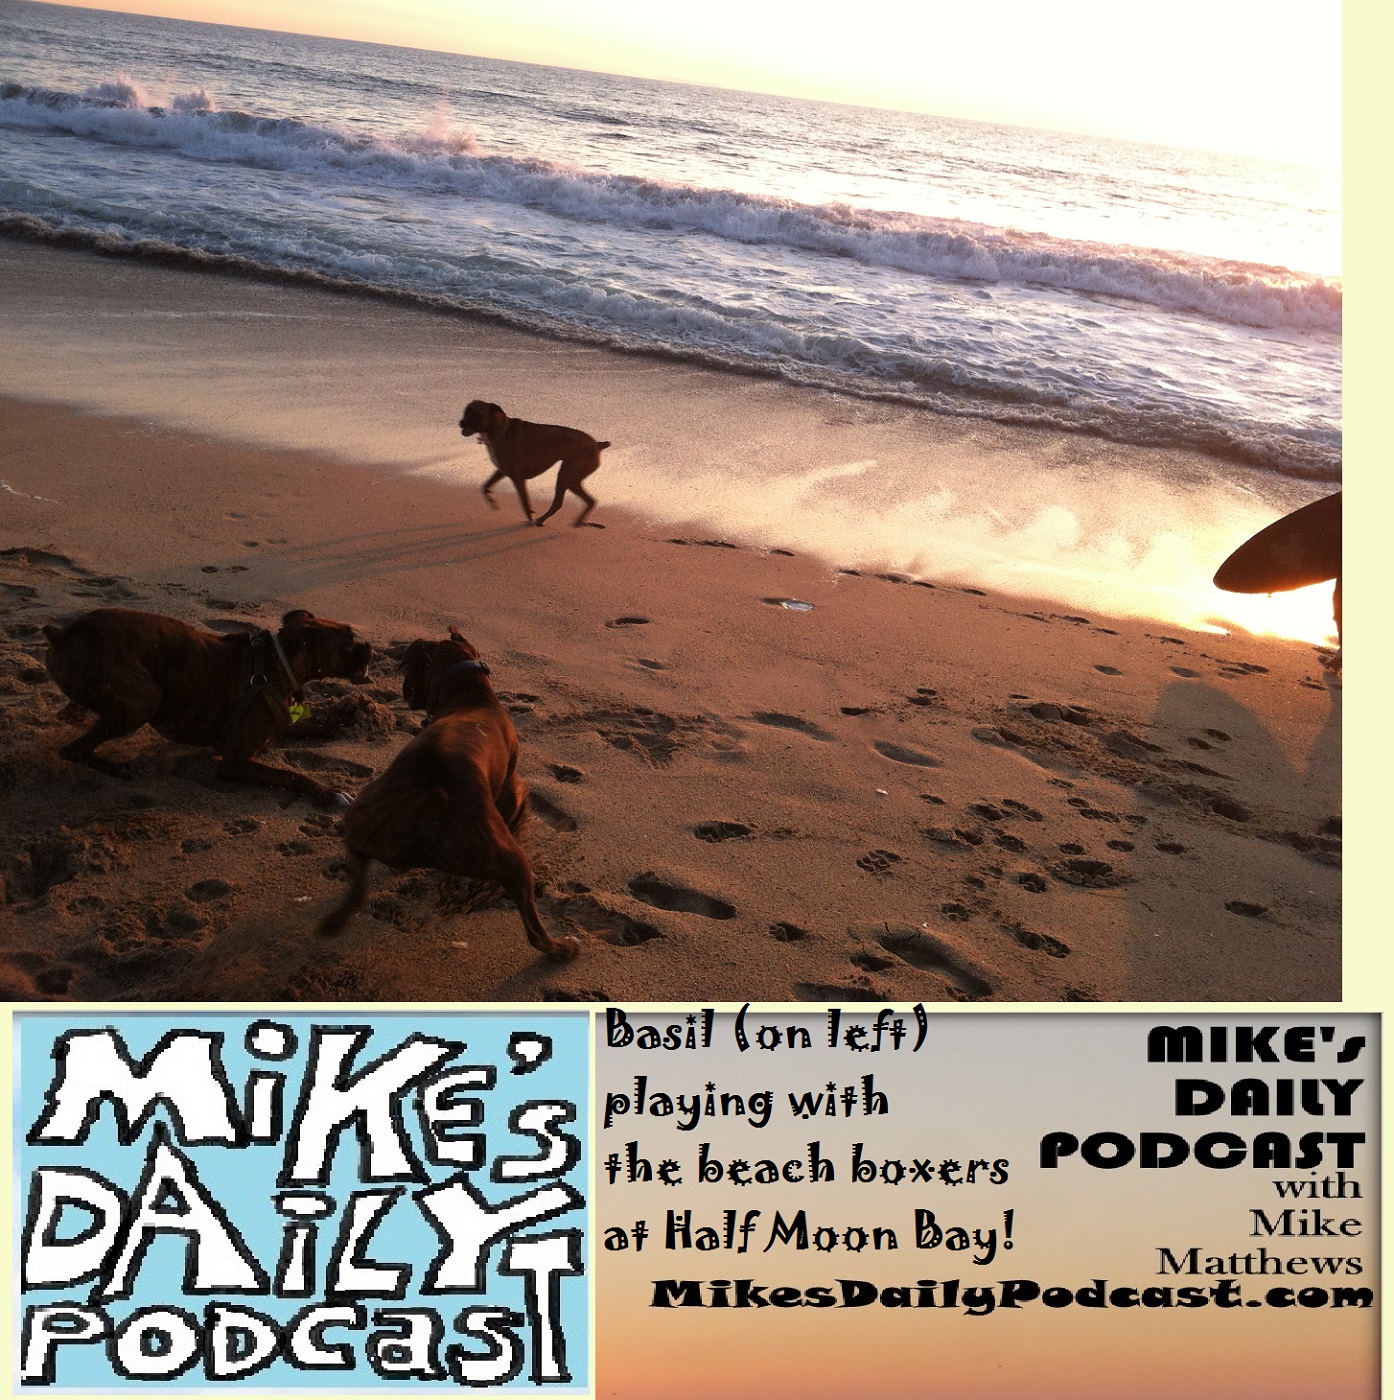 MIKEs DAILY PODCAST 1118 Half Moon Bay Boxers